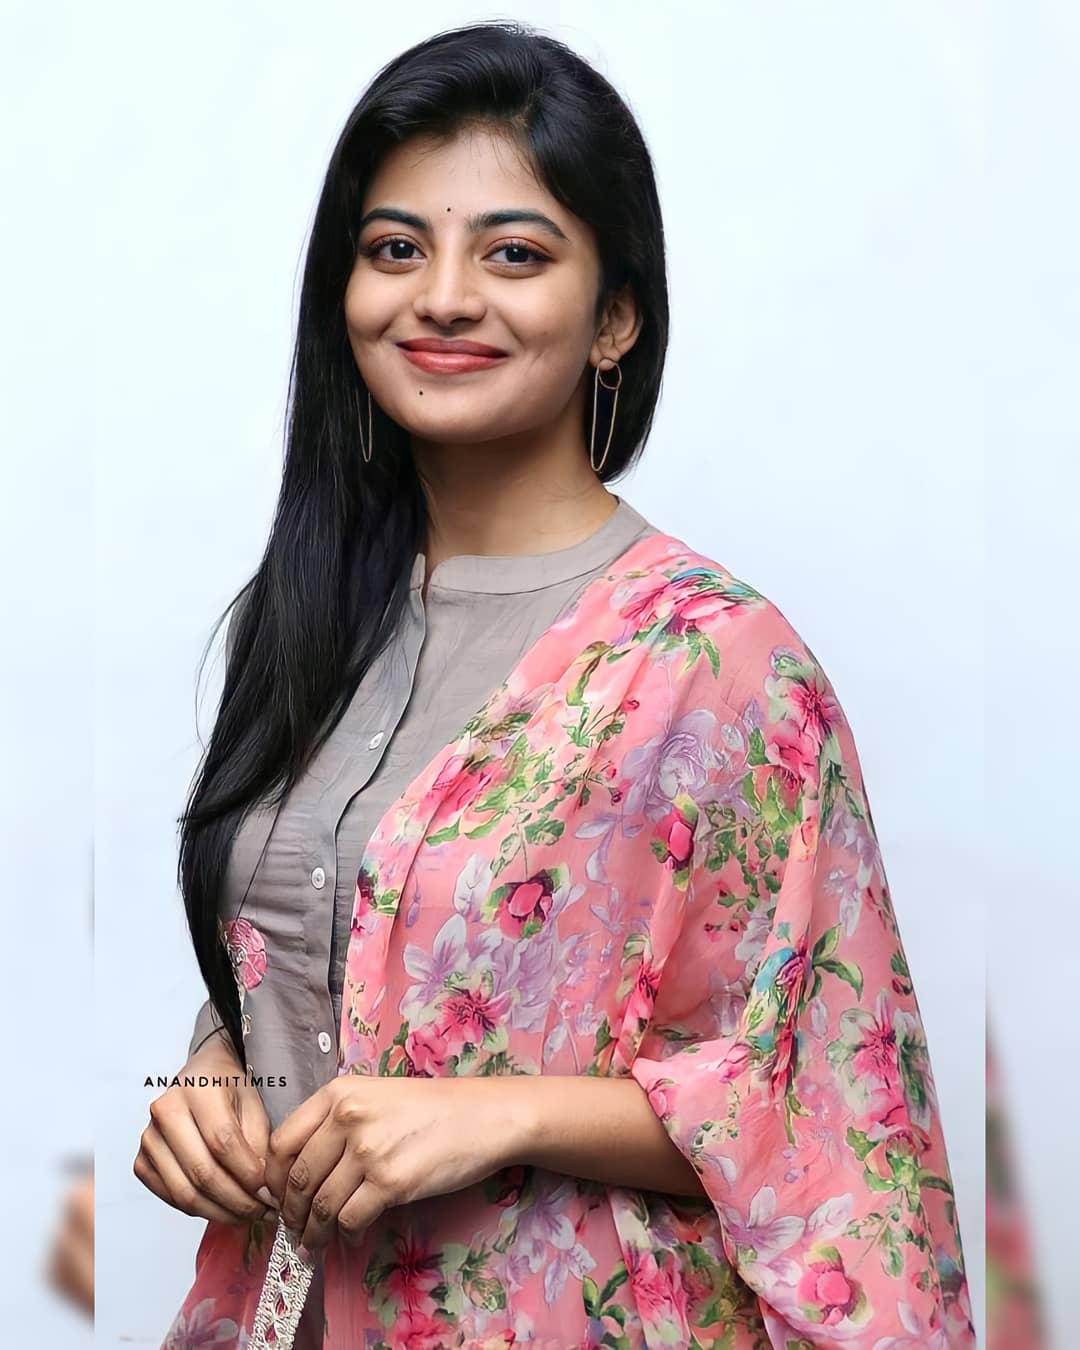 Tamil actress Anandhi latest hot photos Photos: HD Images, Pictures,  Stills, First Look Posters of Tamil actress Anandhi latest hot photos Movie  